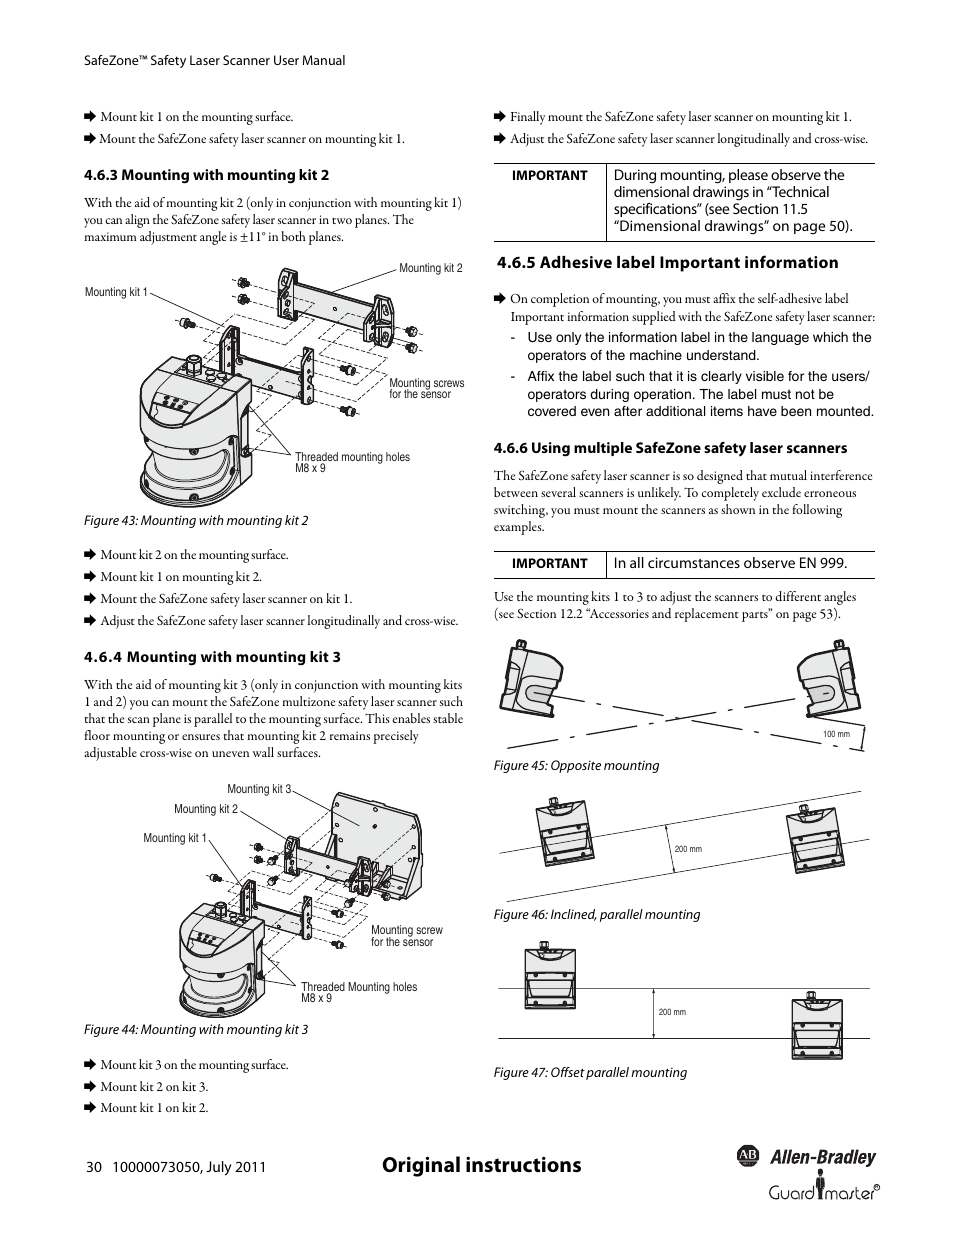 Original instructions, 5 adhesive label important information | Rockwell Automation 442L SafeZone Singlezone & Multizone Safety Laser Scanner User Manual | Page 32 / 60